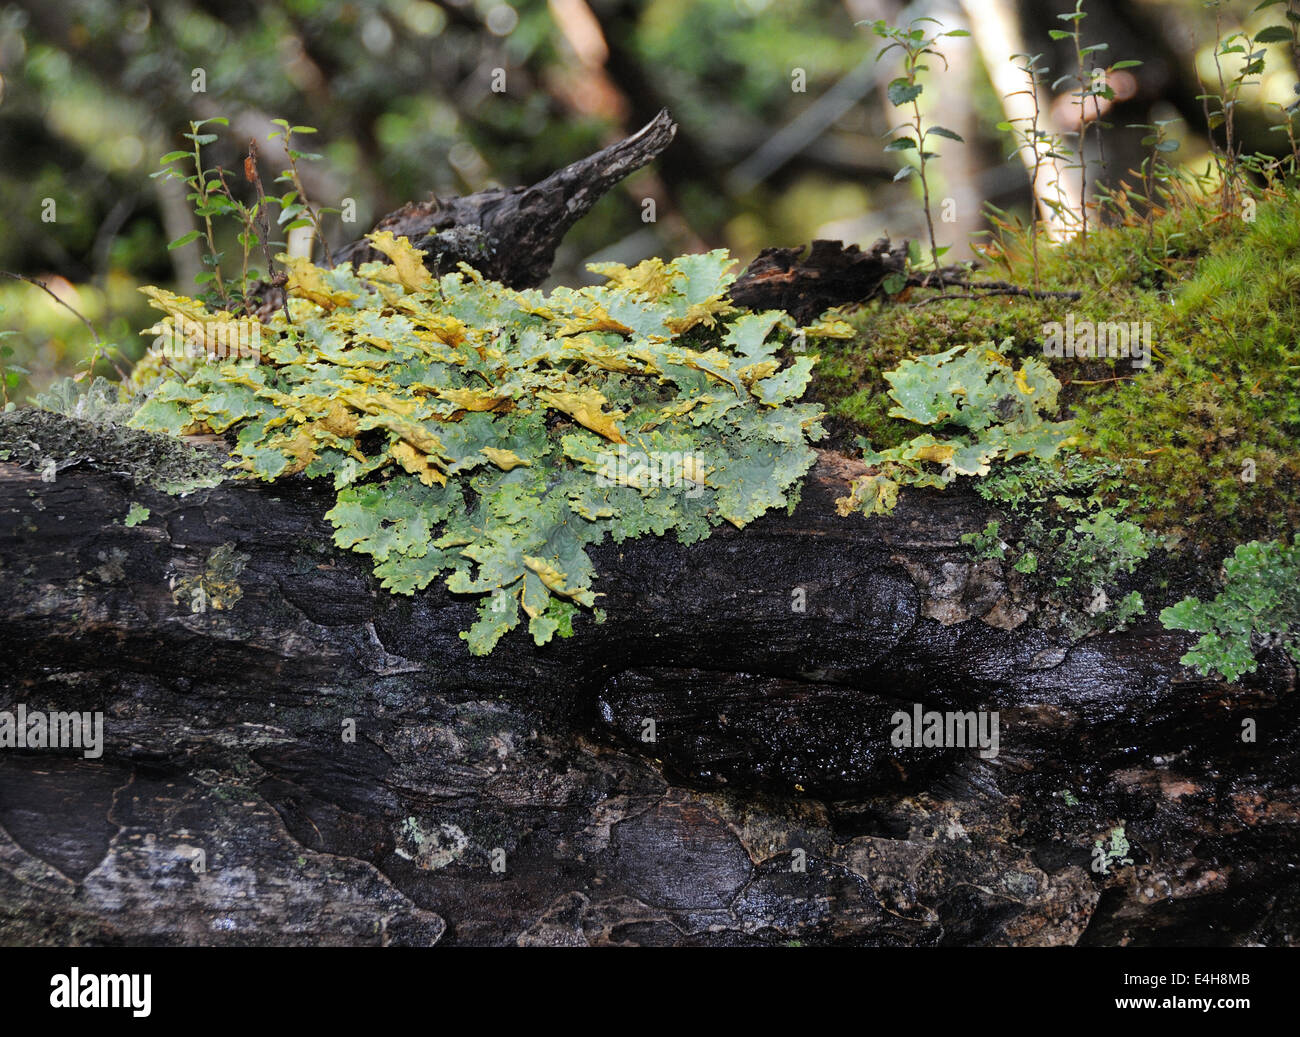 Mosses, liverworts and lichens on a soggy rotting log in the damp subpolar forest. Garibaldi Fjord, Strait of Magellan, Chile. Stock Photo